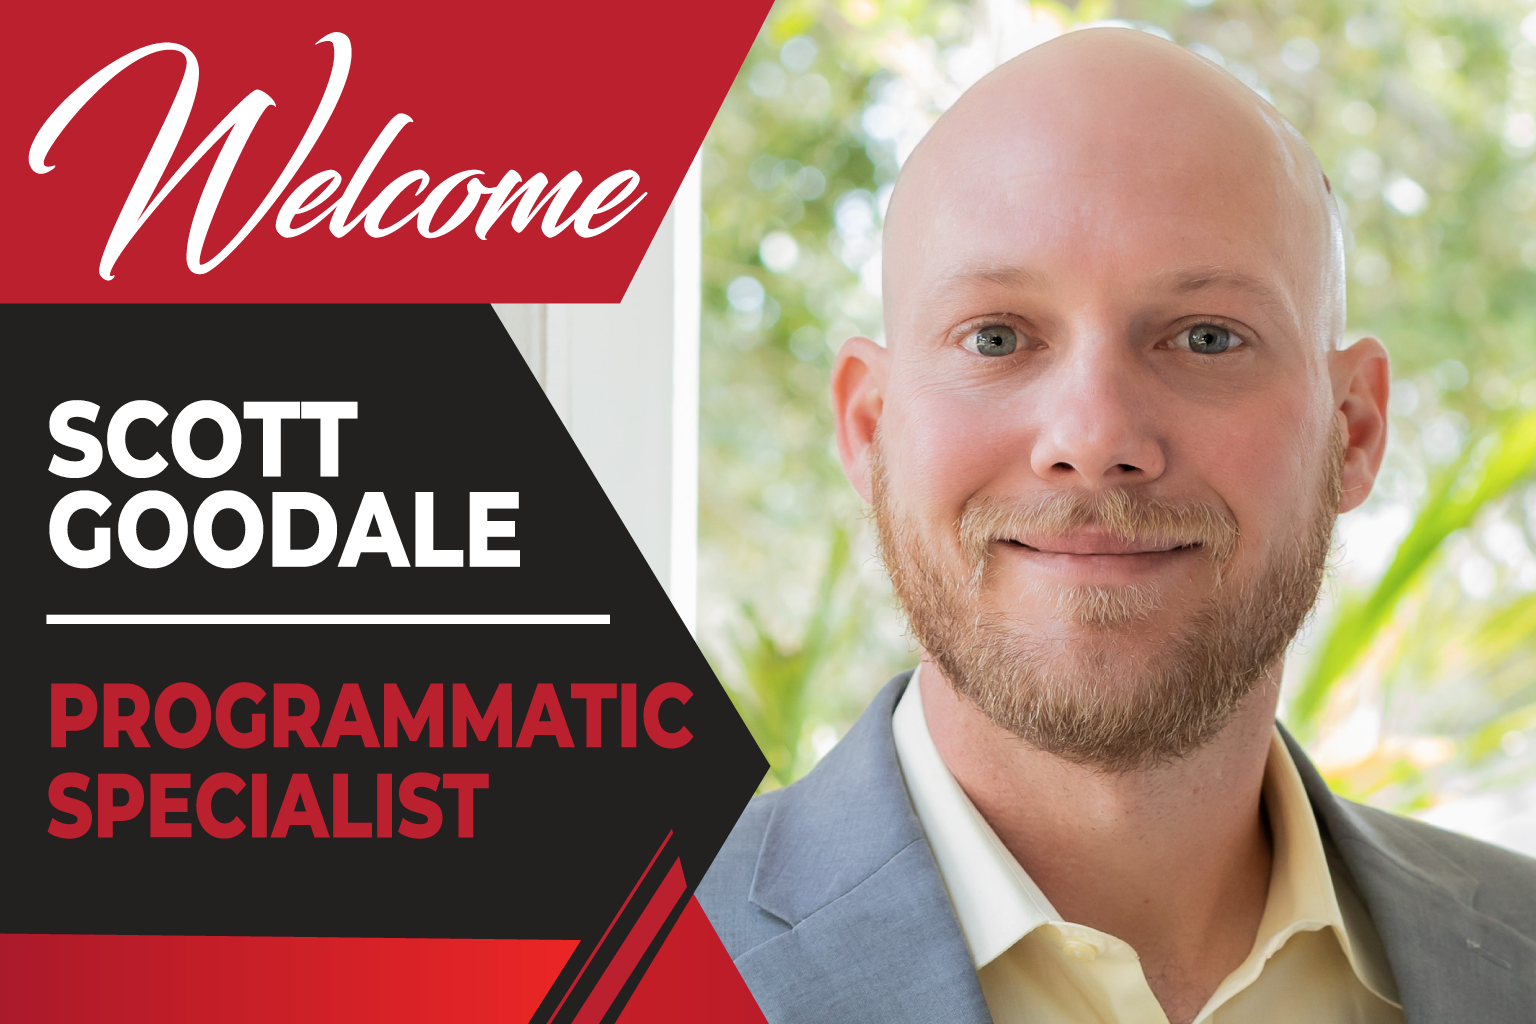 Welcome Scott Goodale to the ThriveFuel team!